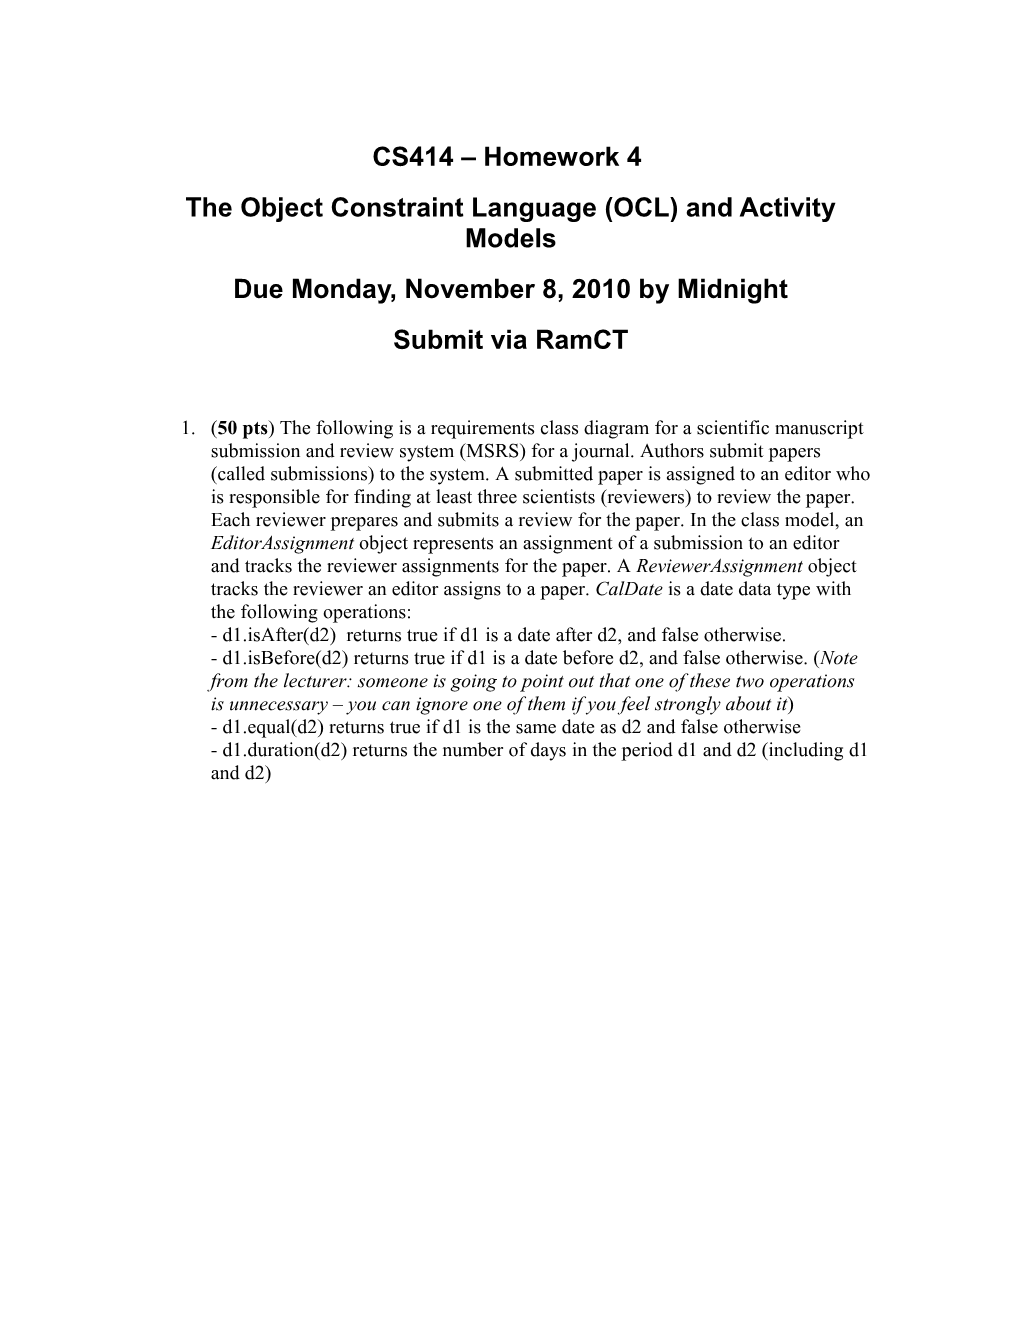 The Object Constraint Language (OCL) and Activity Models